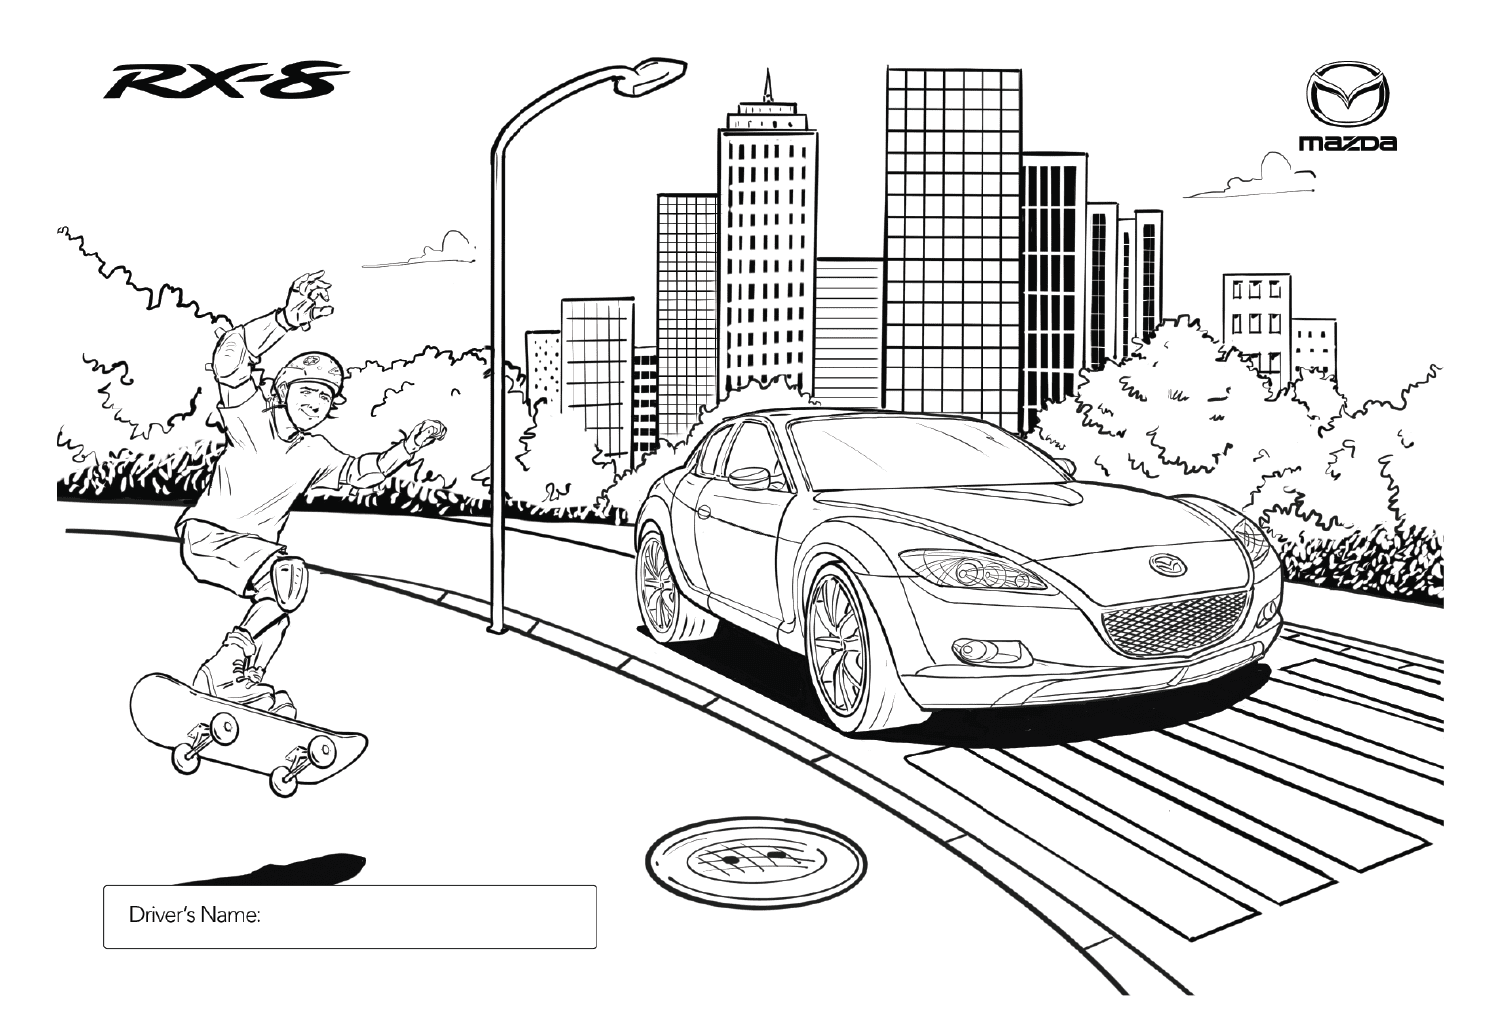 Mazda RX8 Coloring Page from Mazda